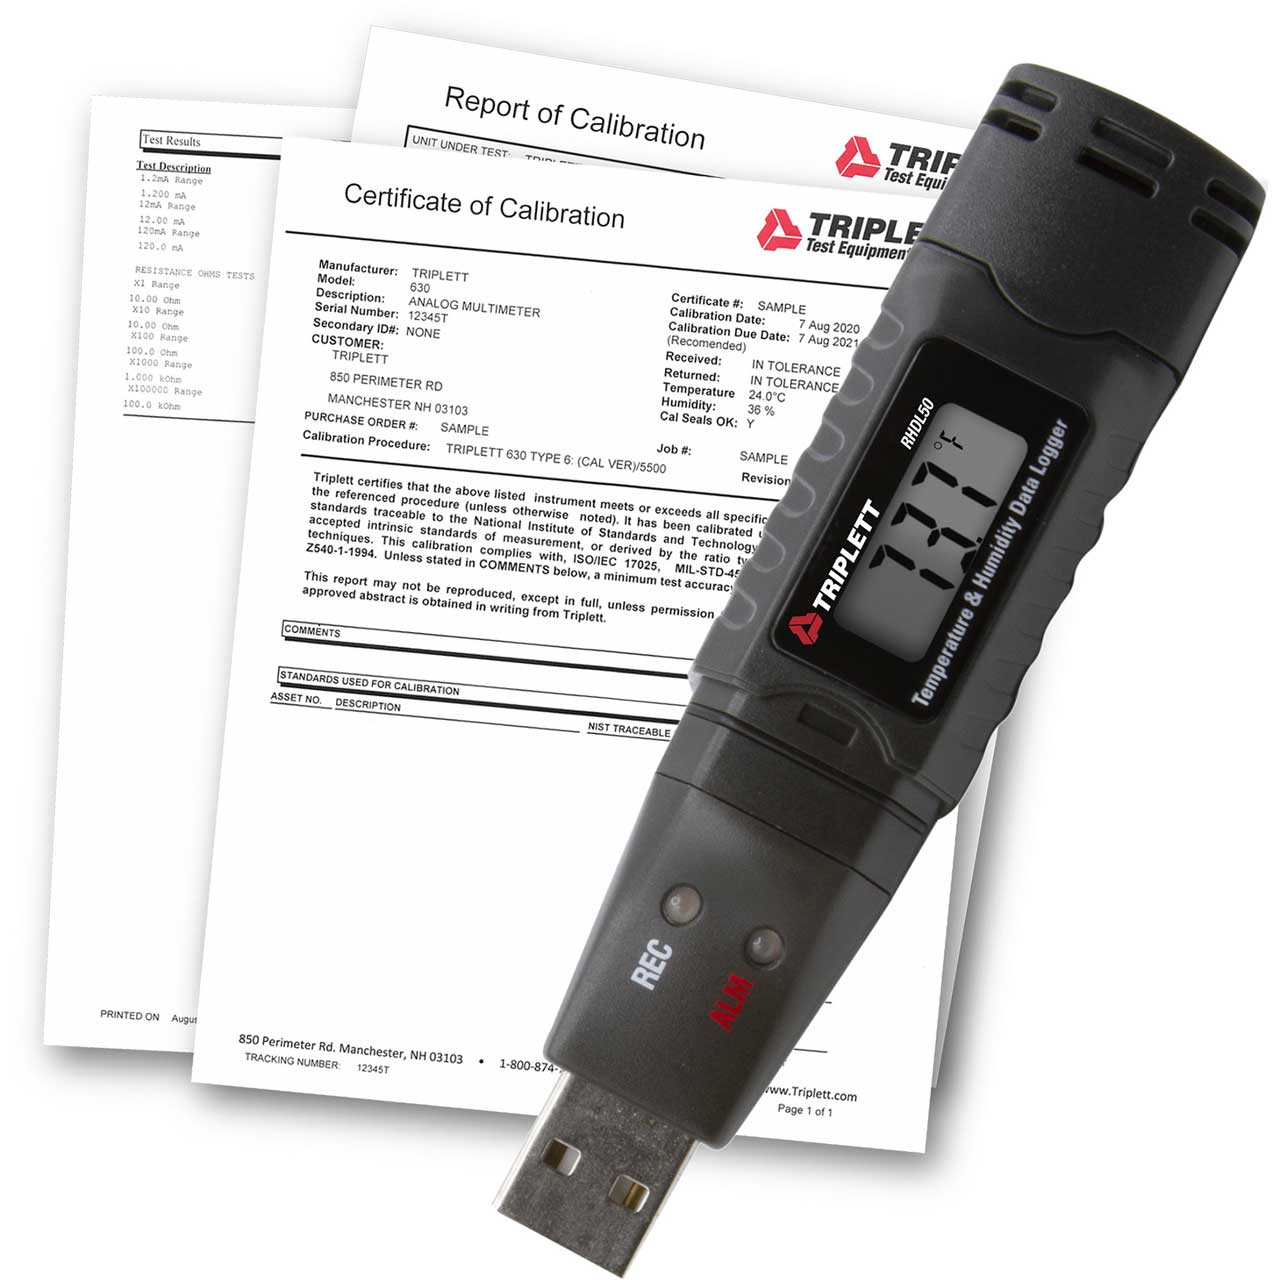 Triplett RHDL50-NIST Temperature and Humidity Datalogger with Certificate of Traceability to NIST